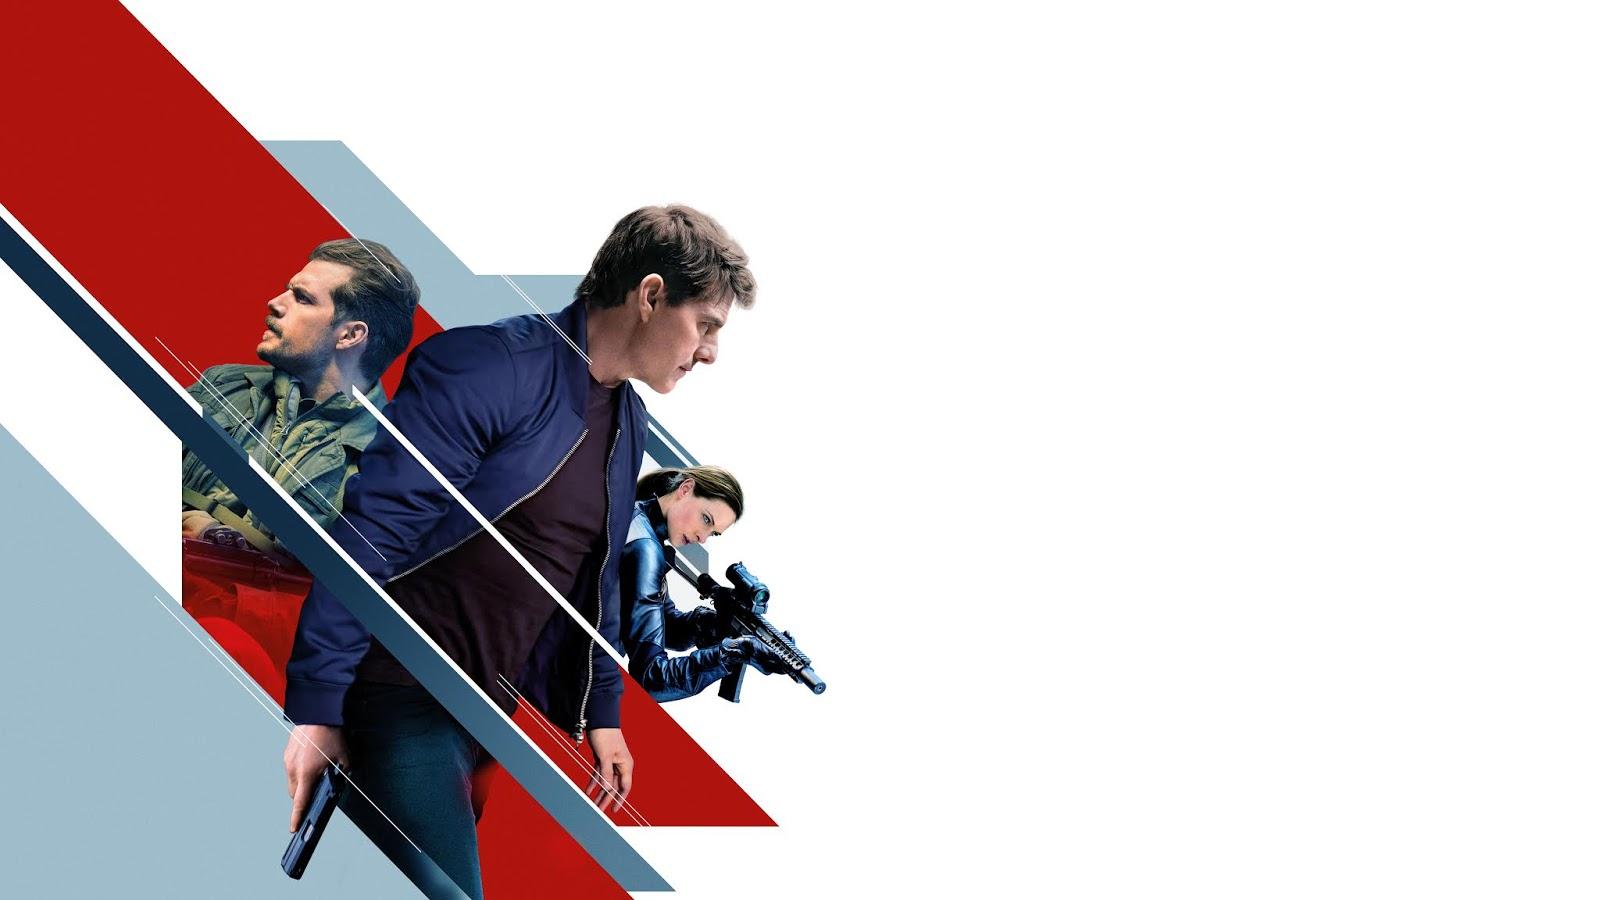 Mission Impossible 6 Wallpaper. MY FB IMAGES